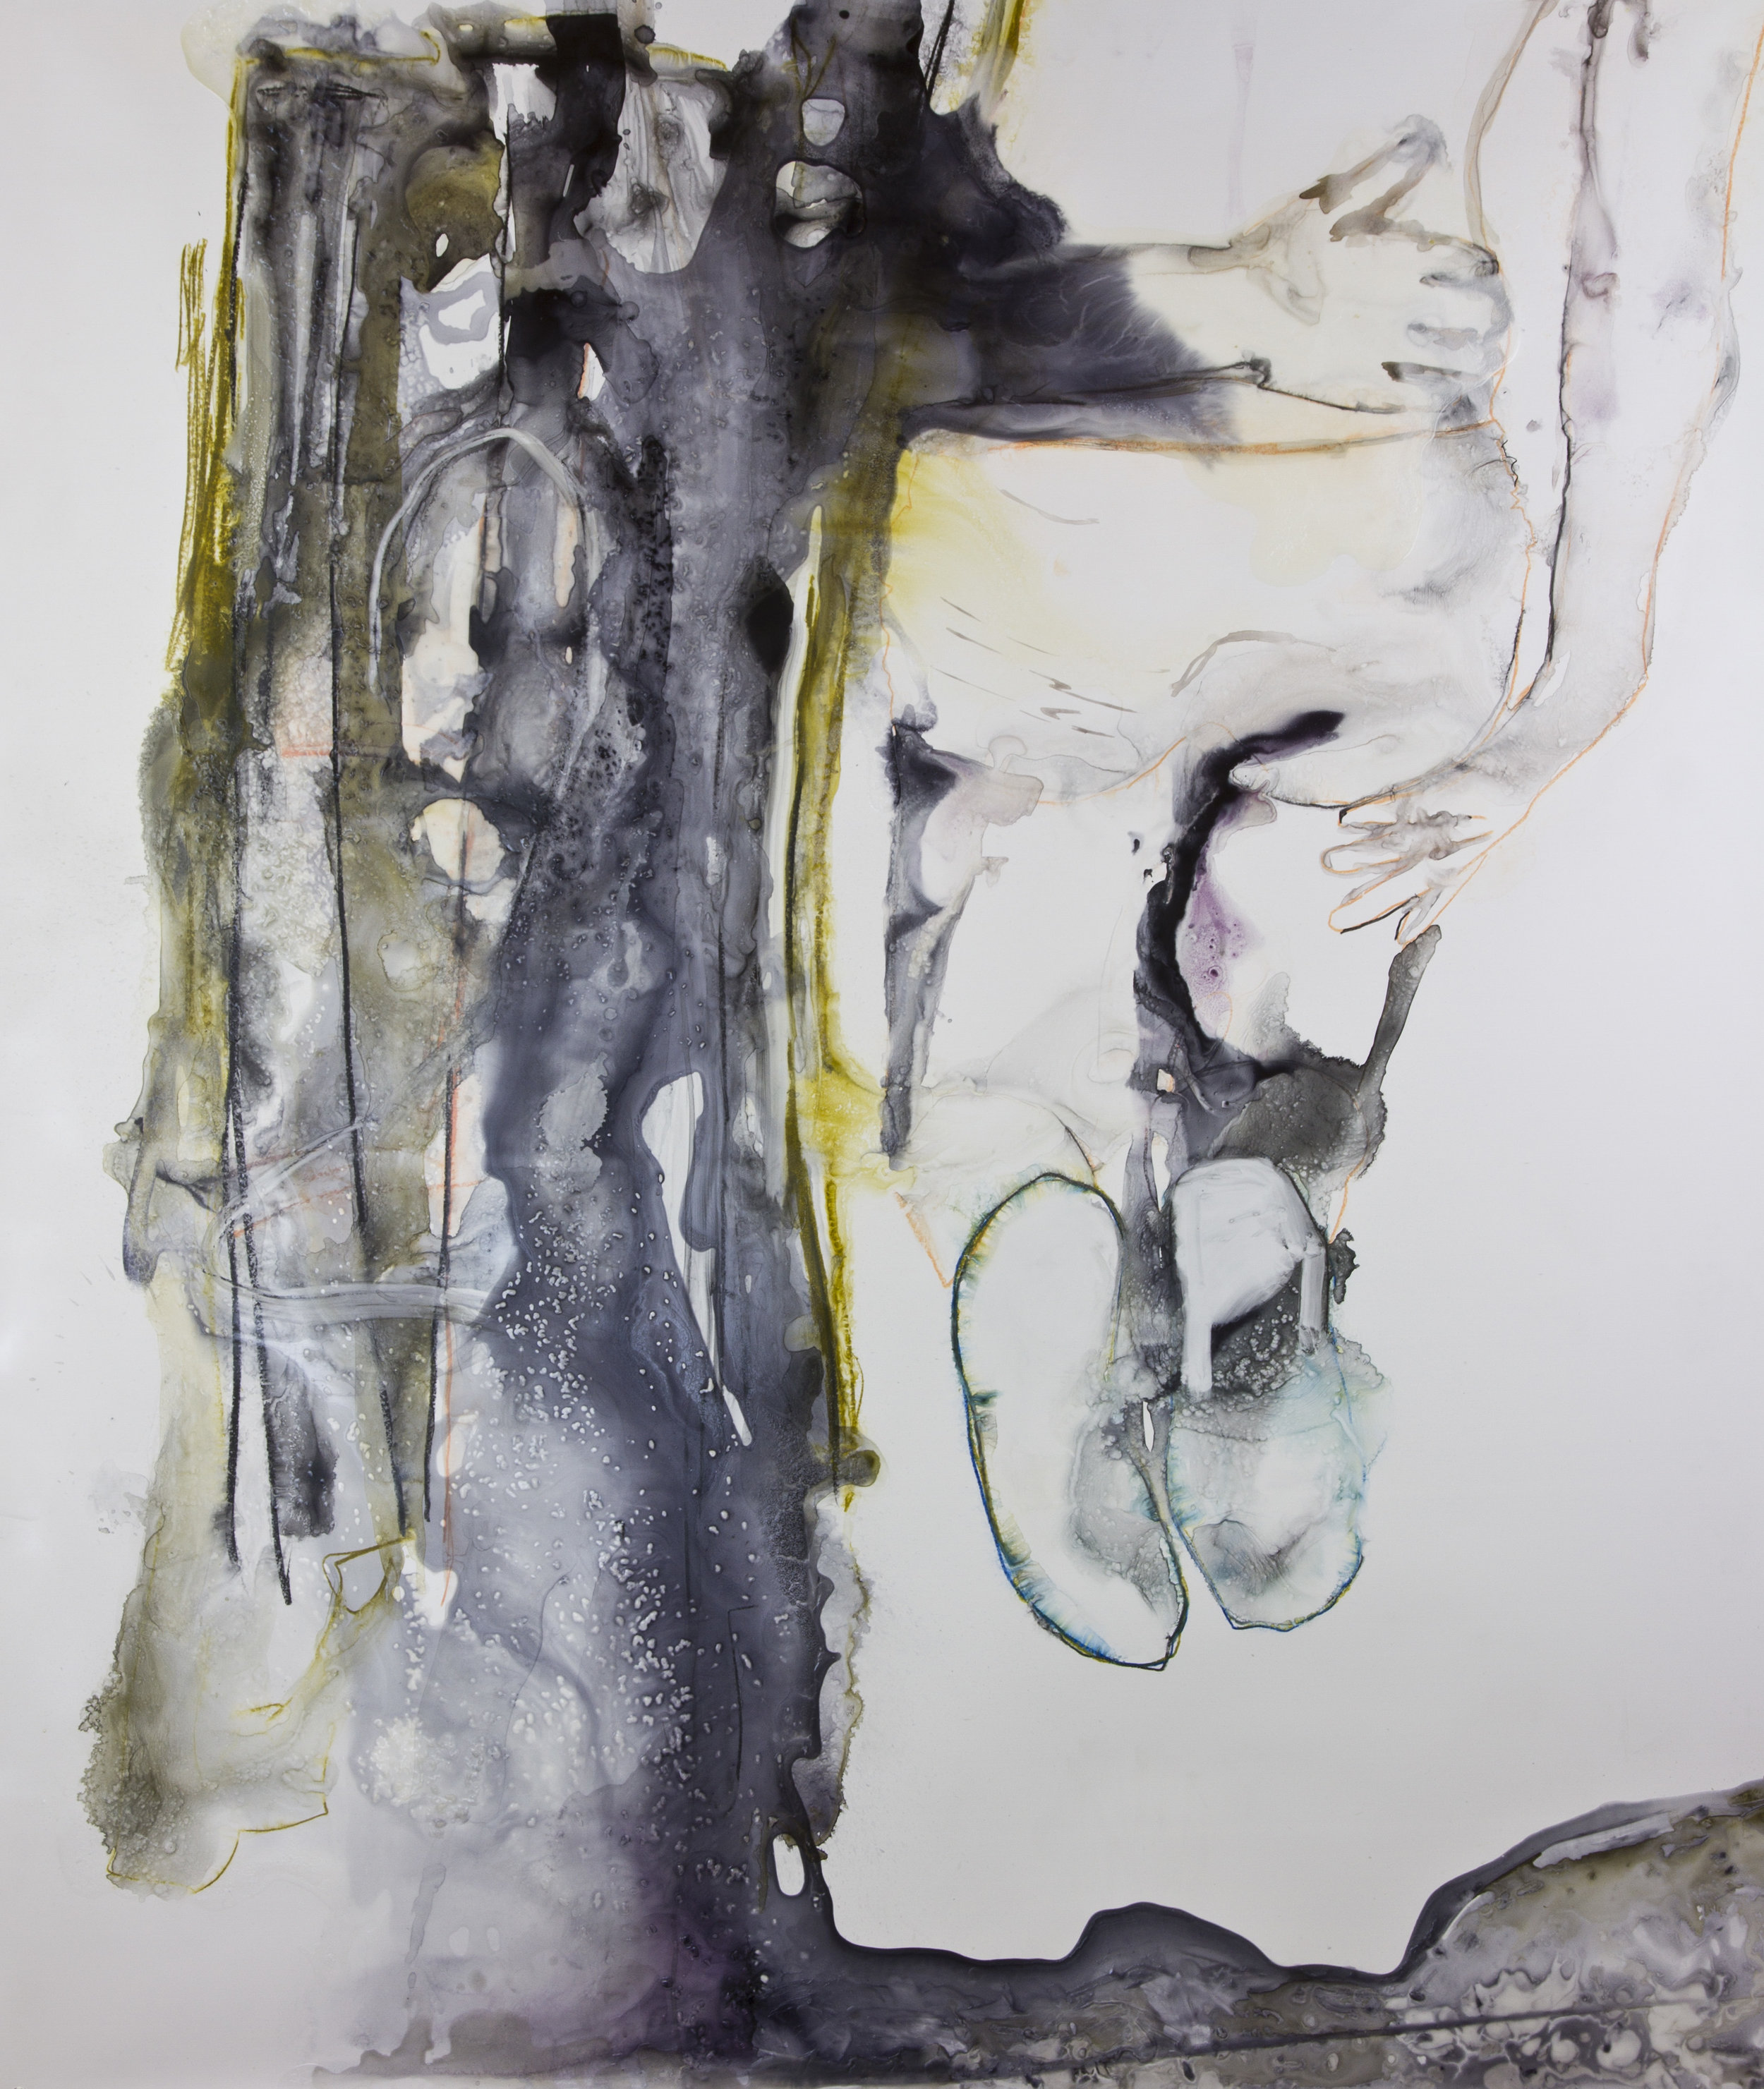 Shona Thought My Abyss Was A Radiator, 2013, watercolor and acrylic on polypropylene, 60x60 inches